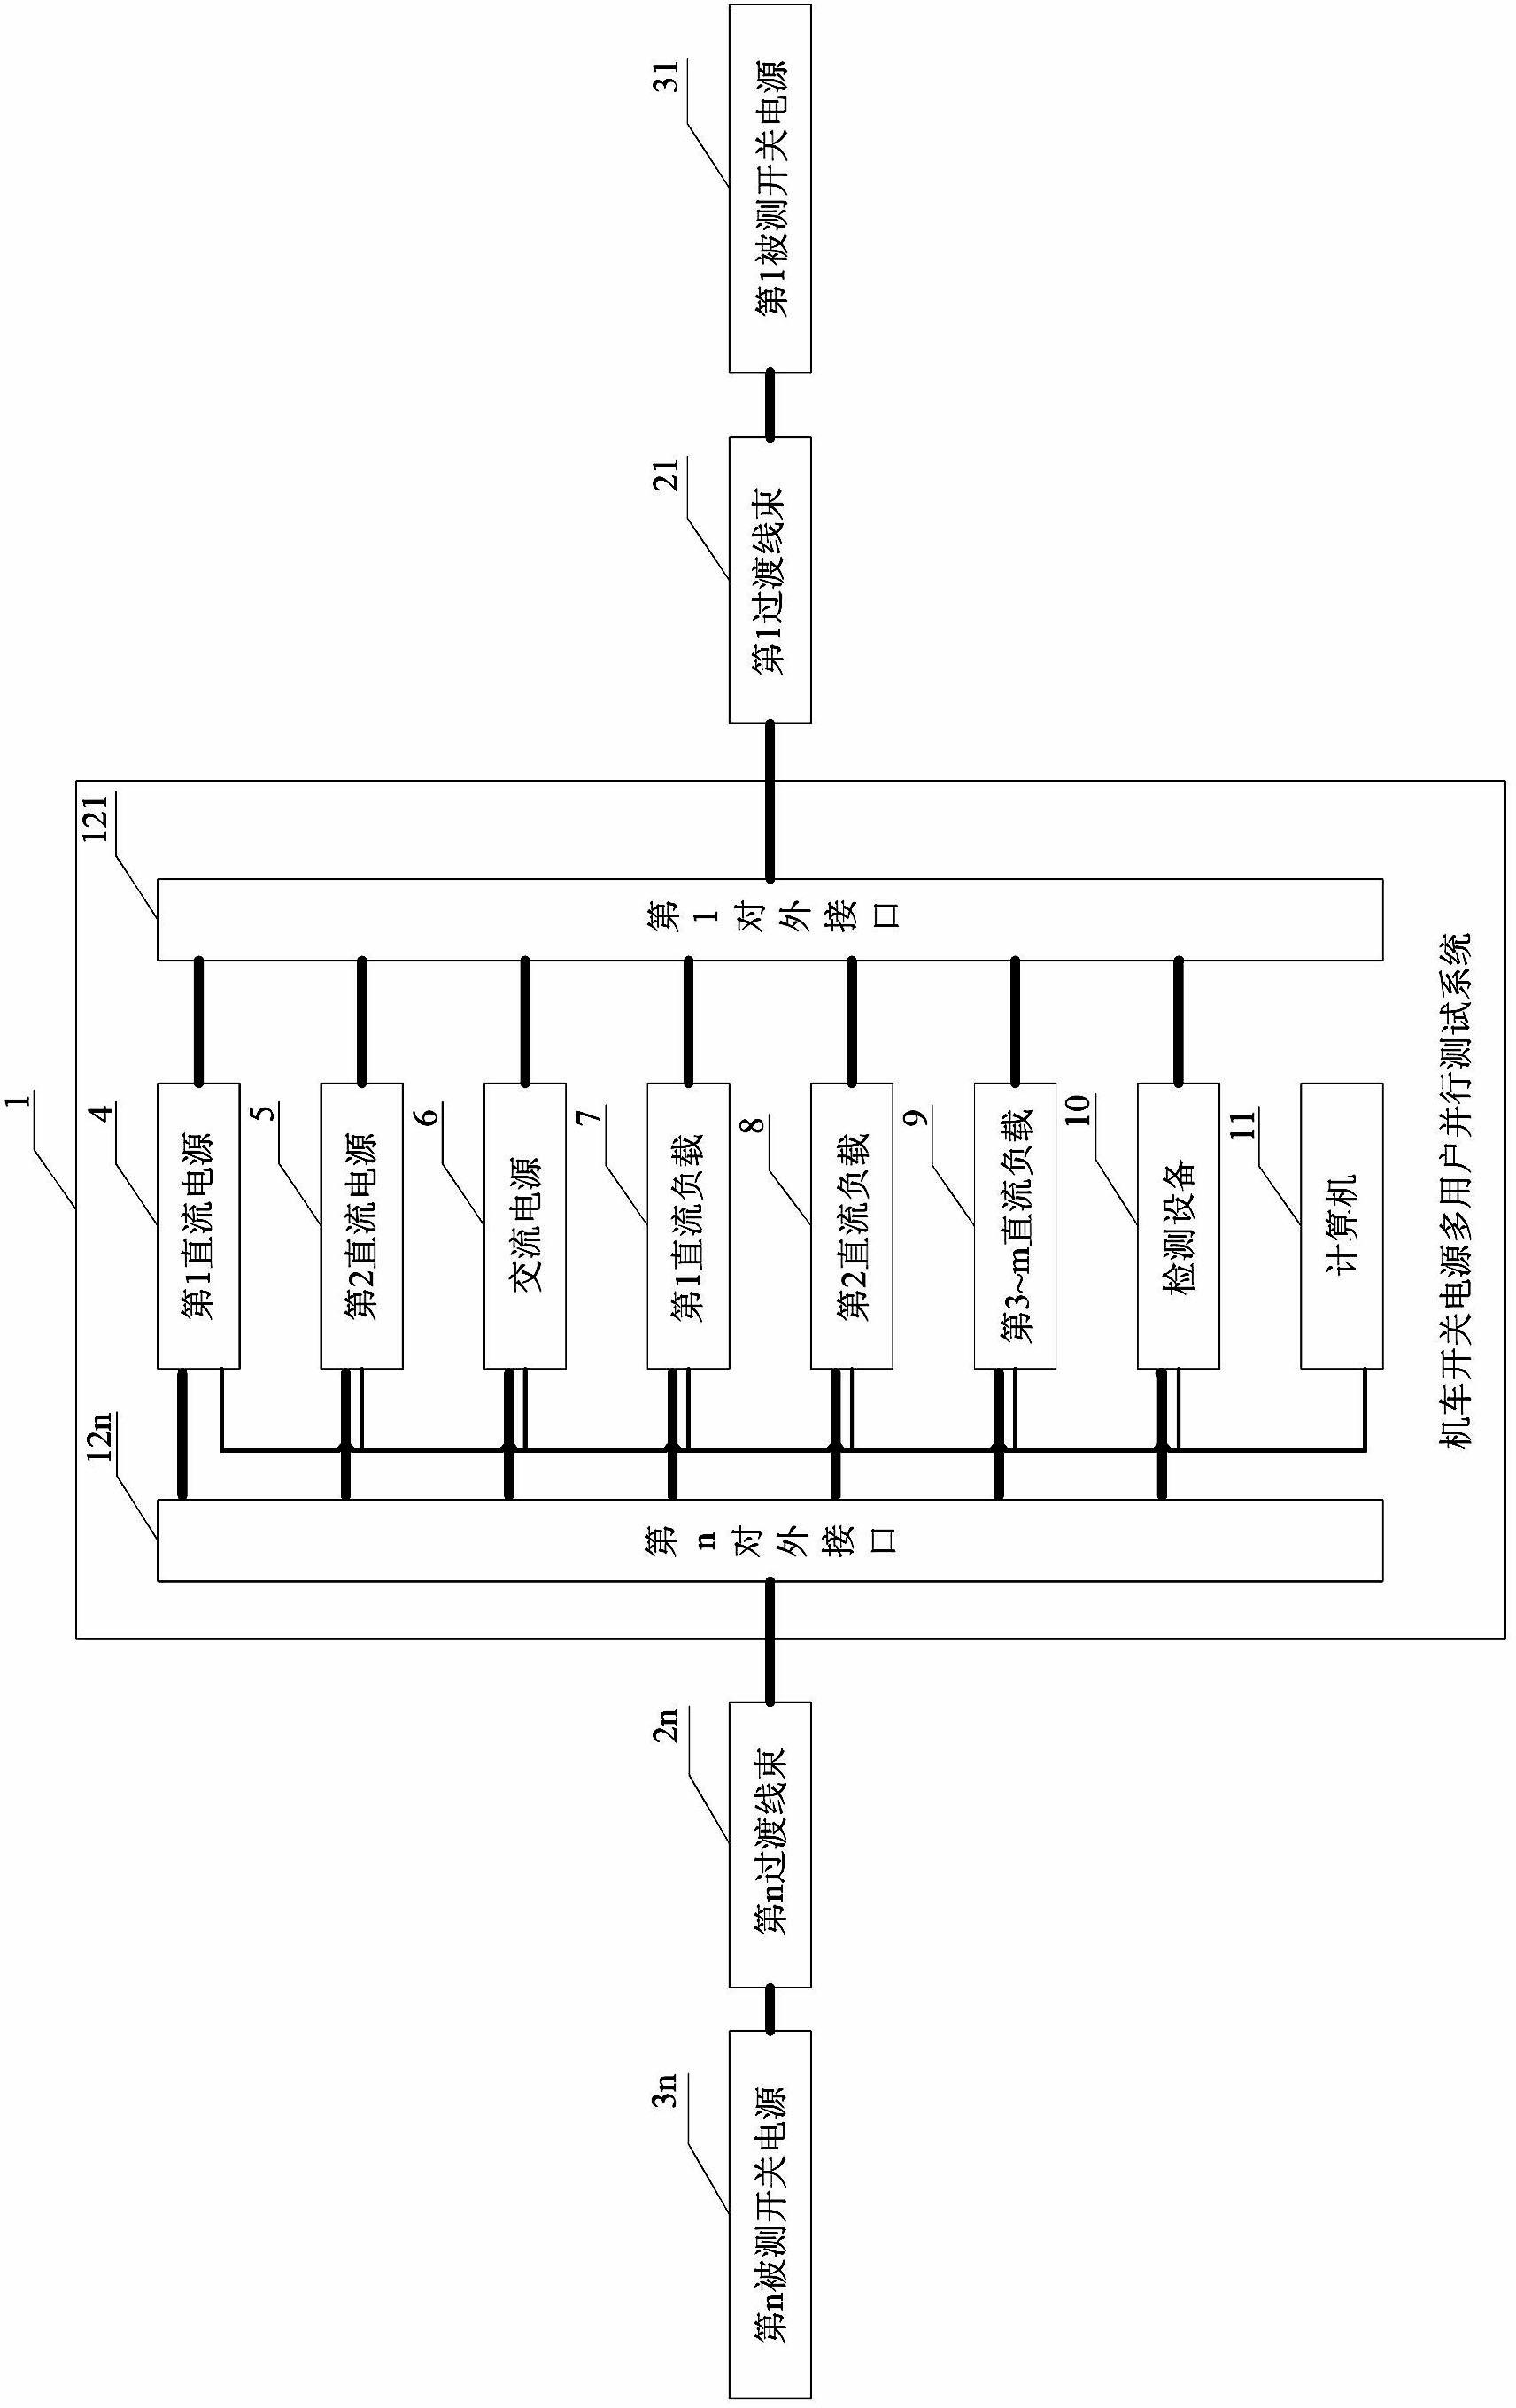 System and method for testing multi-user parallel of locomotive switch power supply